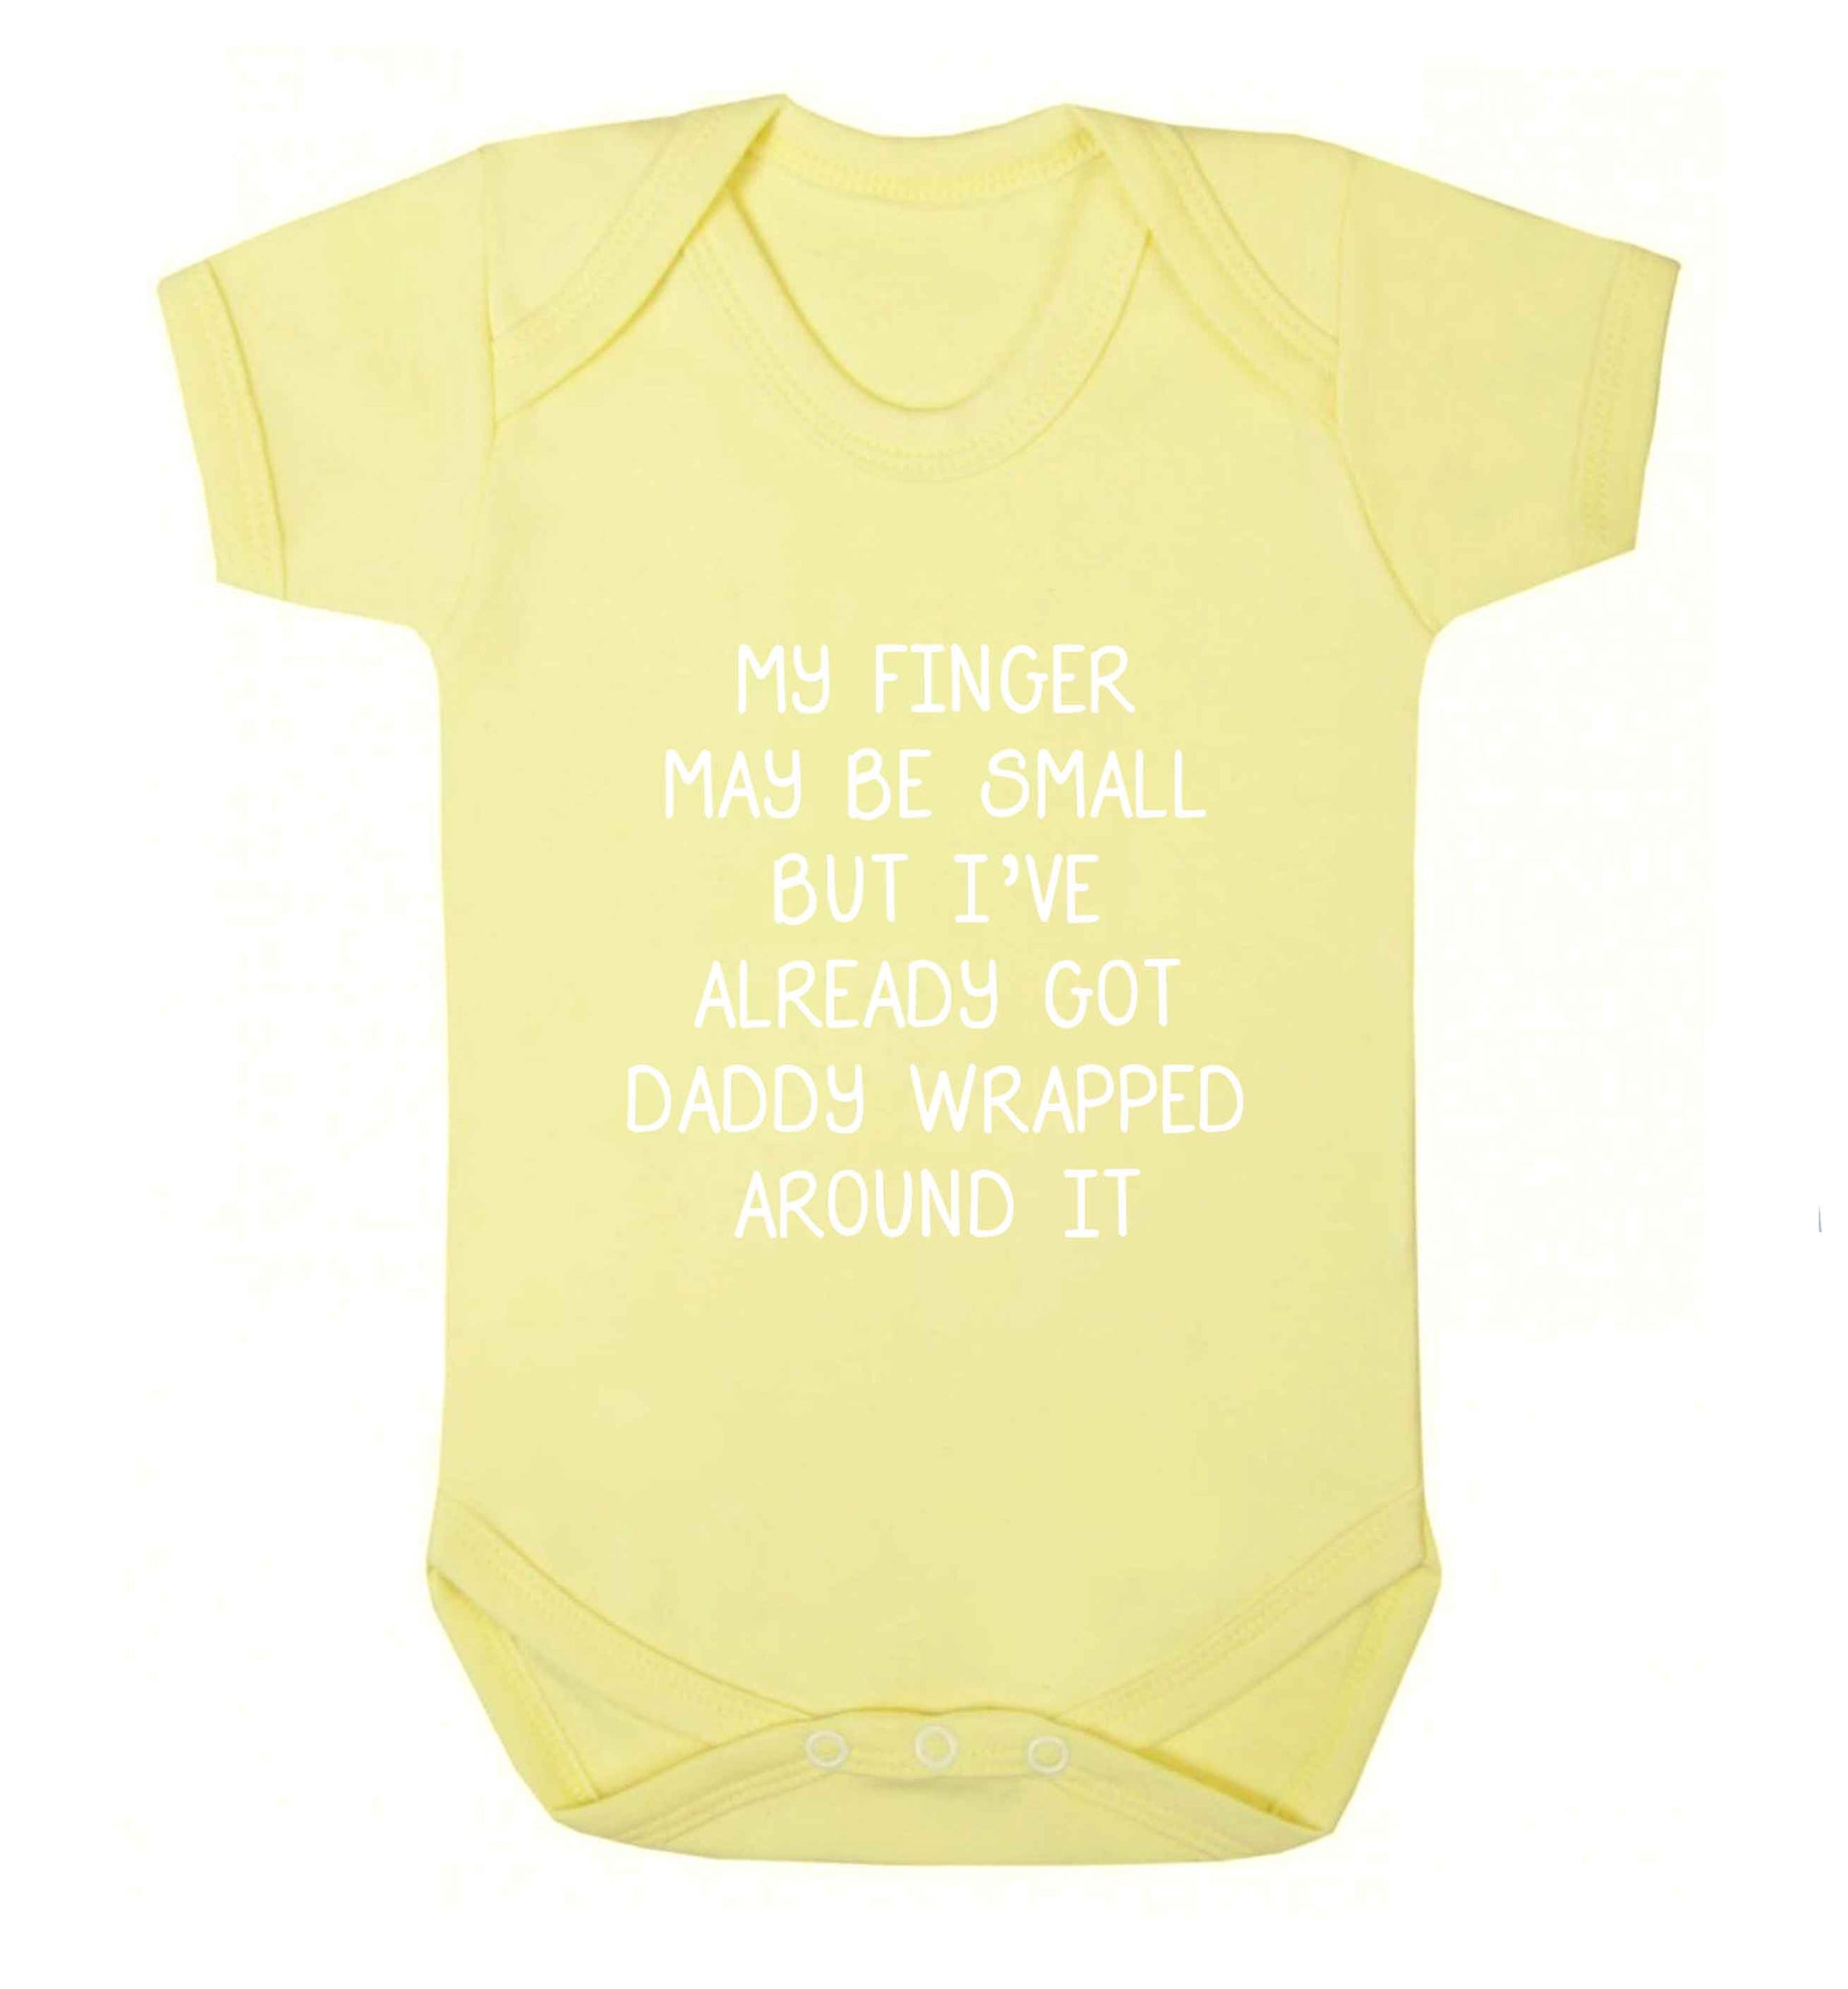 My finger may be small but I've already got daddy wrapped around it baby vest pale yellow 18-24 months